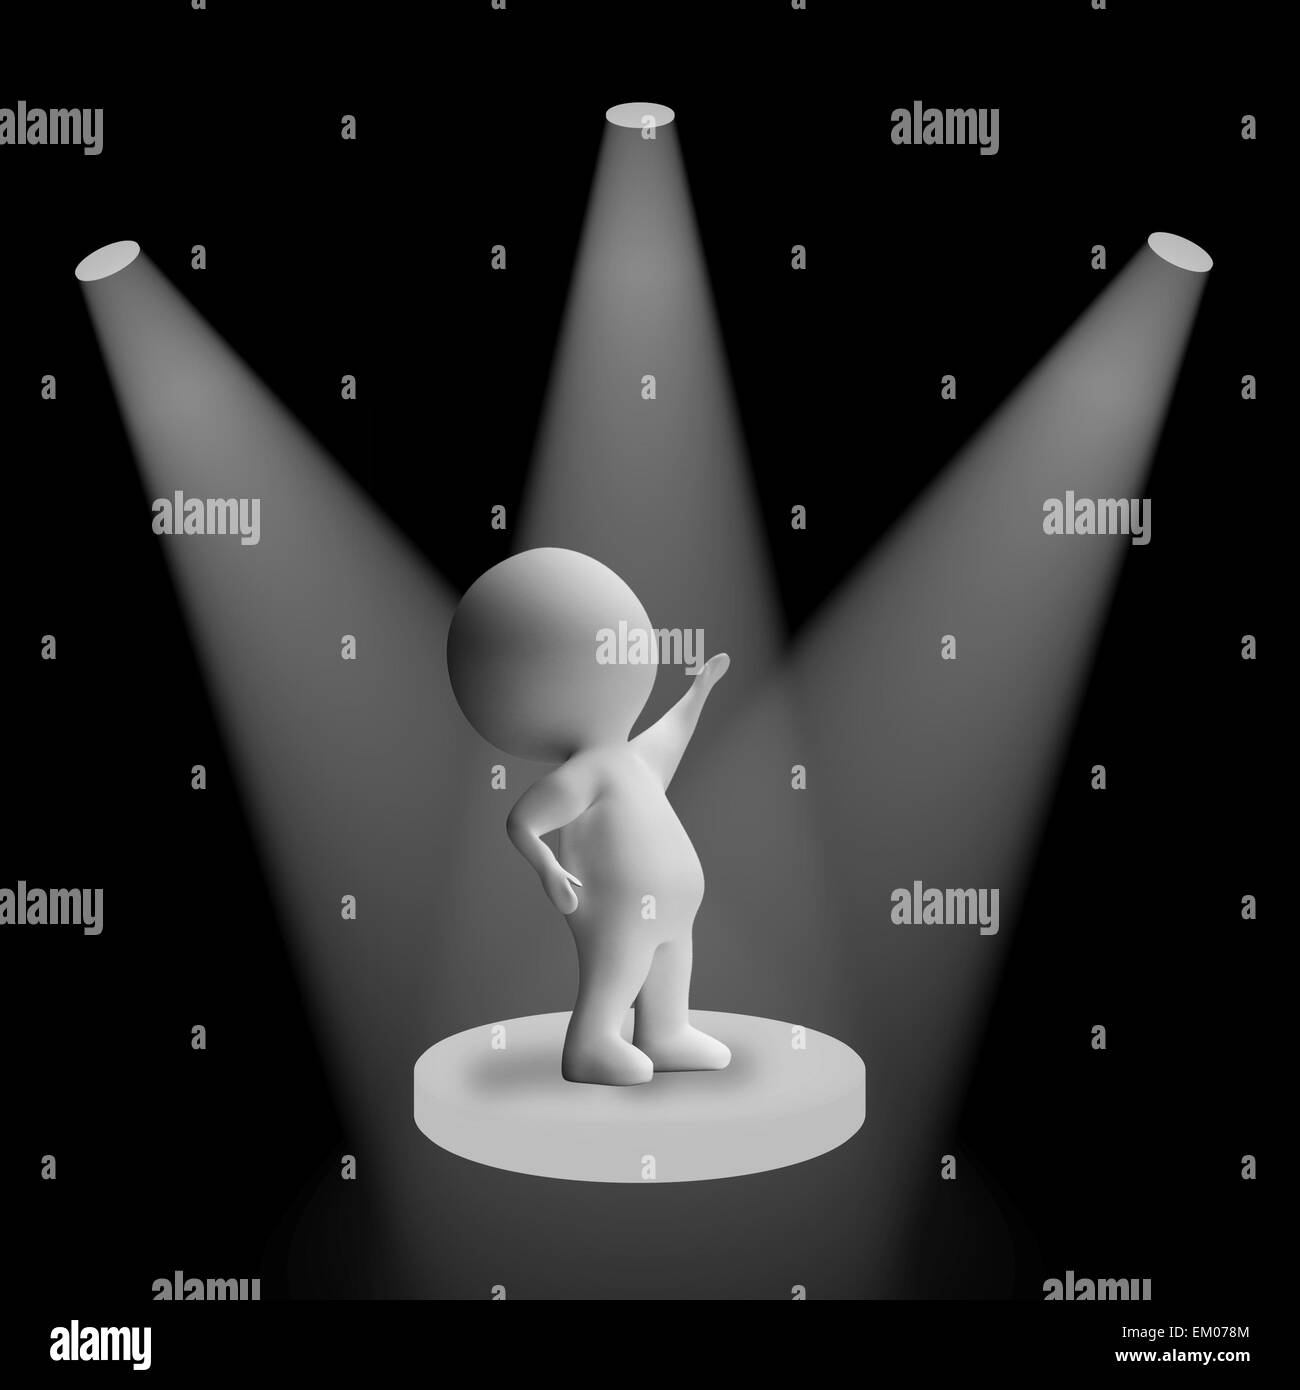 White Spotlights On Character Showing Fame And Performance Stock Photo